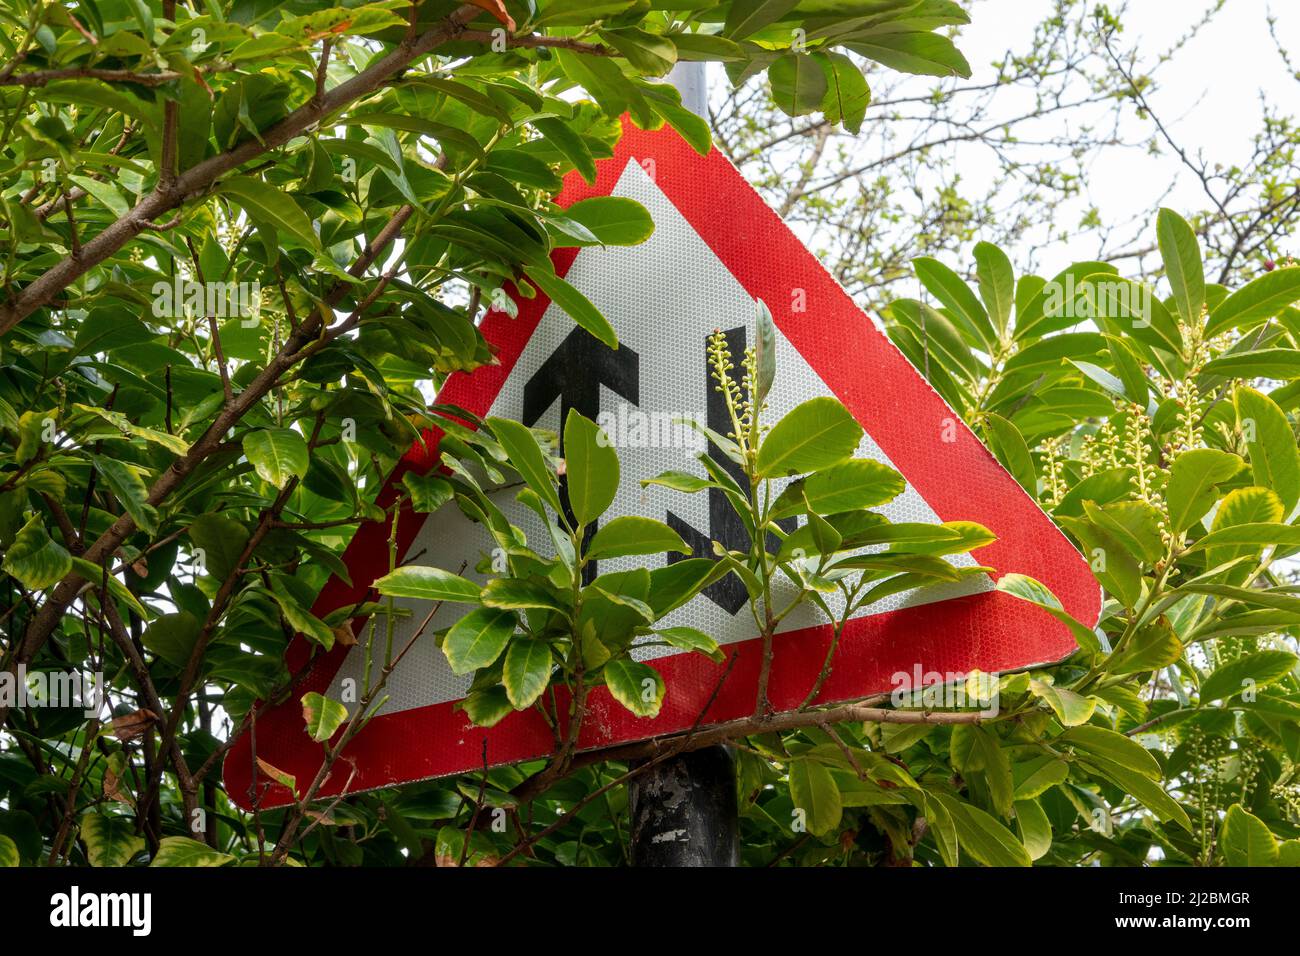 A warning triangle mounted on a roadside post indicating two way traffic completely covered by undergrowth Stock Photo